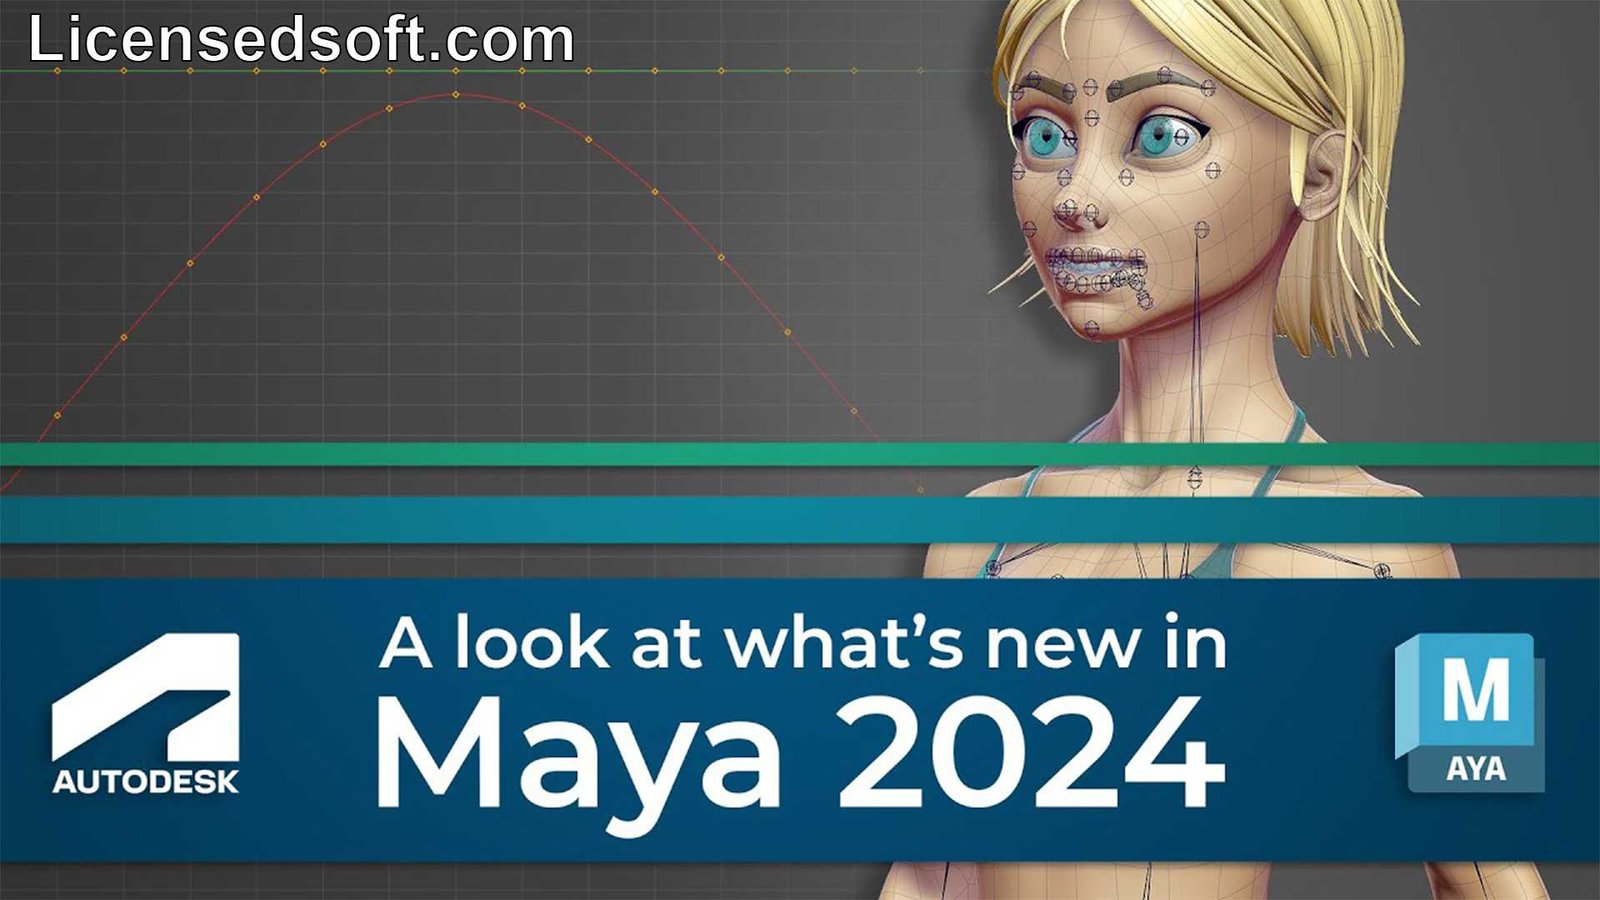 Autodesk Maya 2024.2 for macOS Lifetime Premium cover photo by licensedsoft